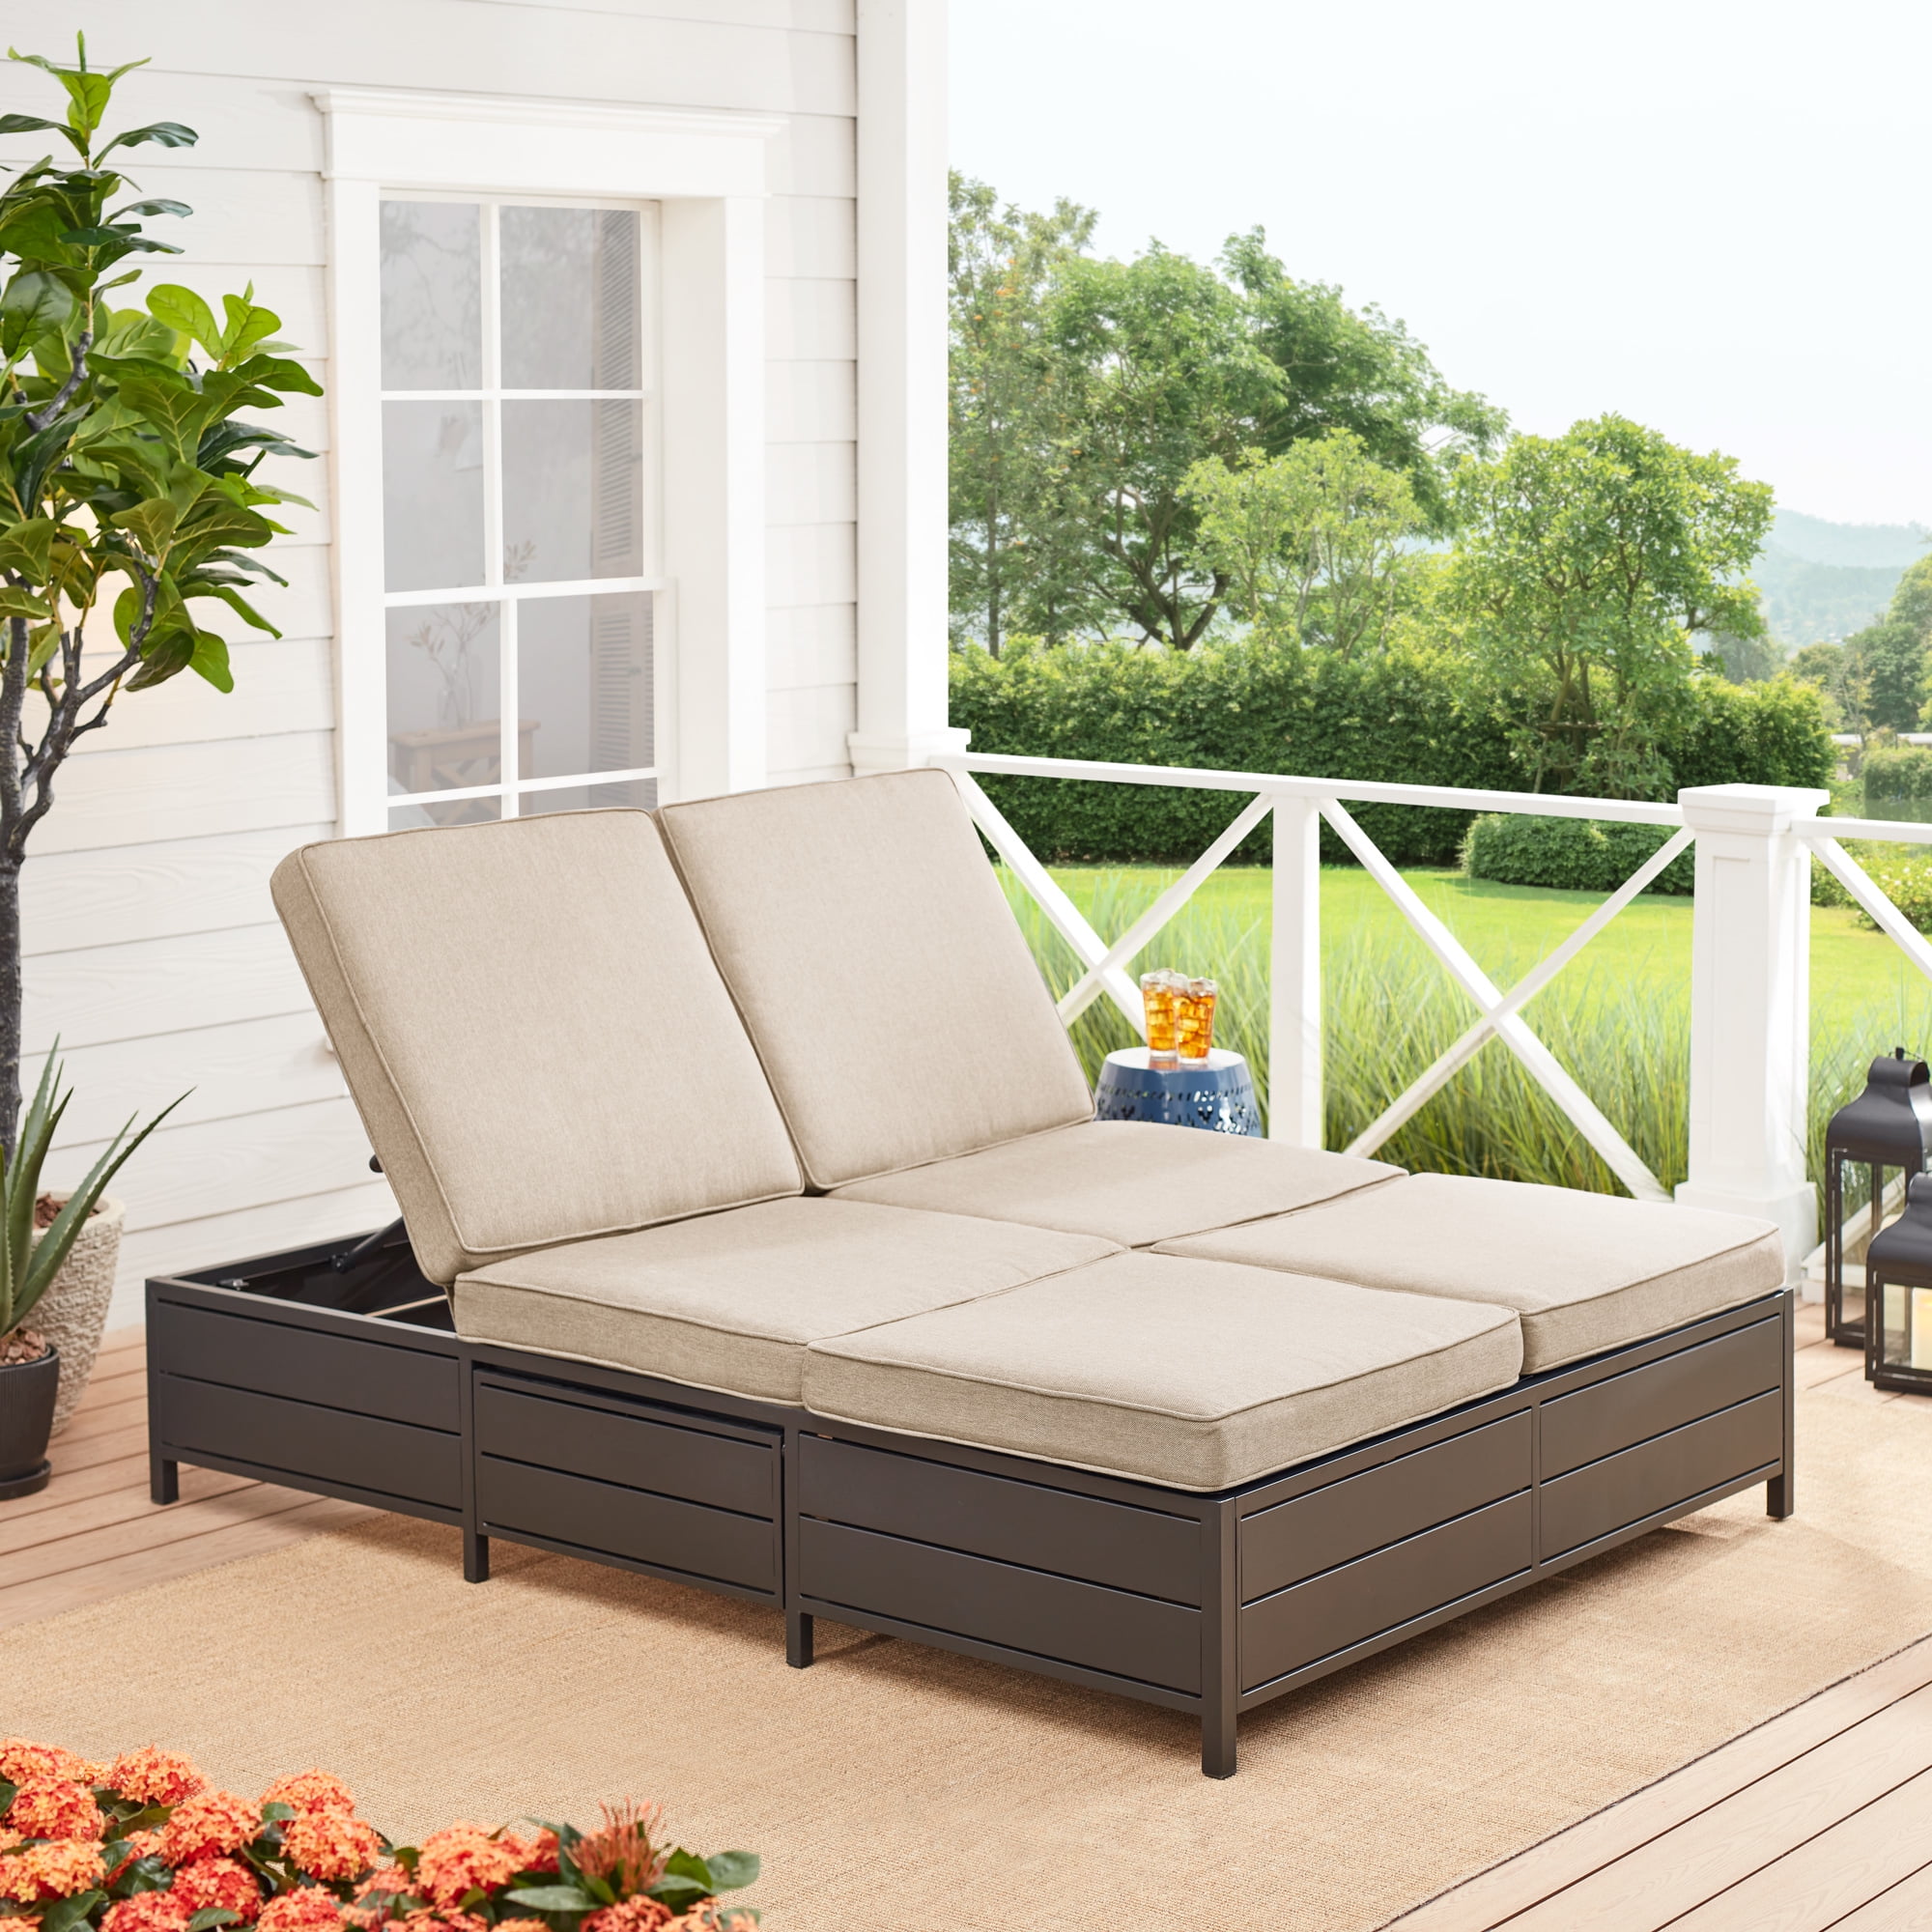 Outdoor Chaise Lounge Bed Off 51, Outdoor Double Lounger